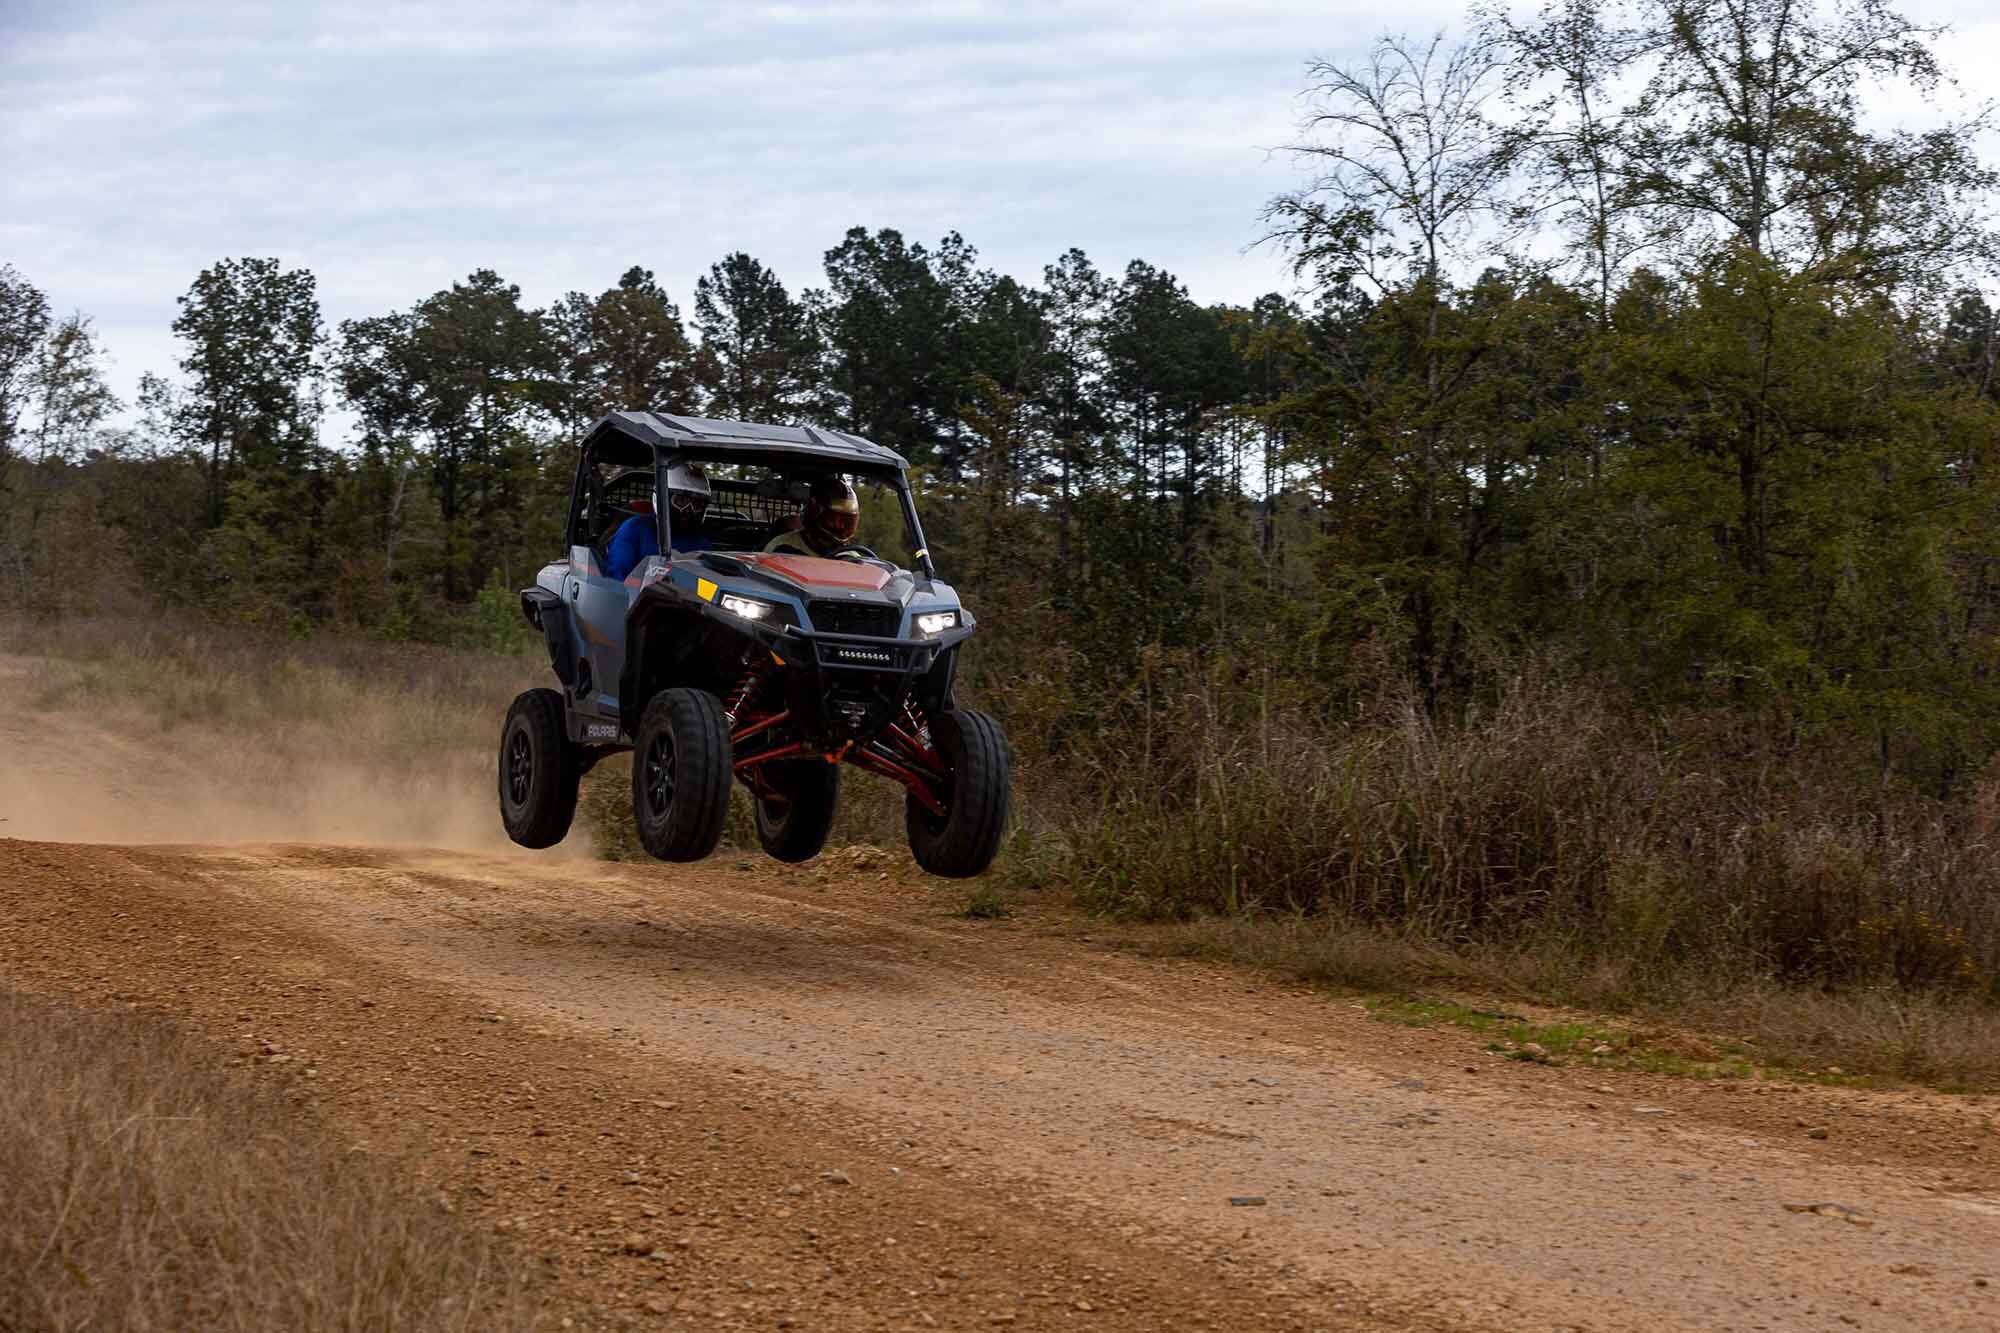 It’s big, but with stout Walker Evans shocks, hefty sway bars, and 100 hp, the Trailhead Edition flies like a much smaller rig.